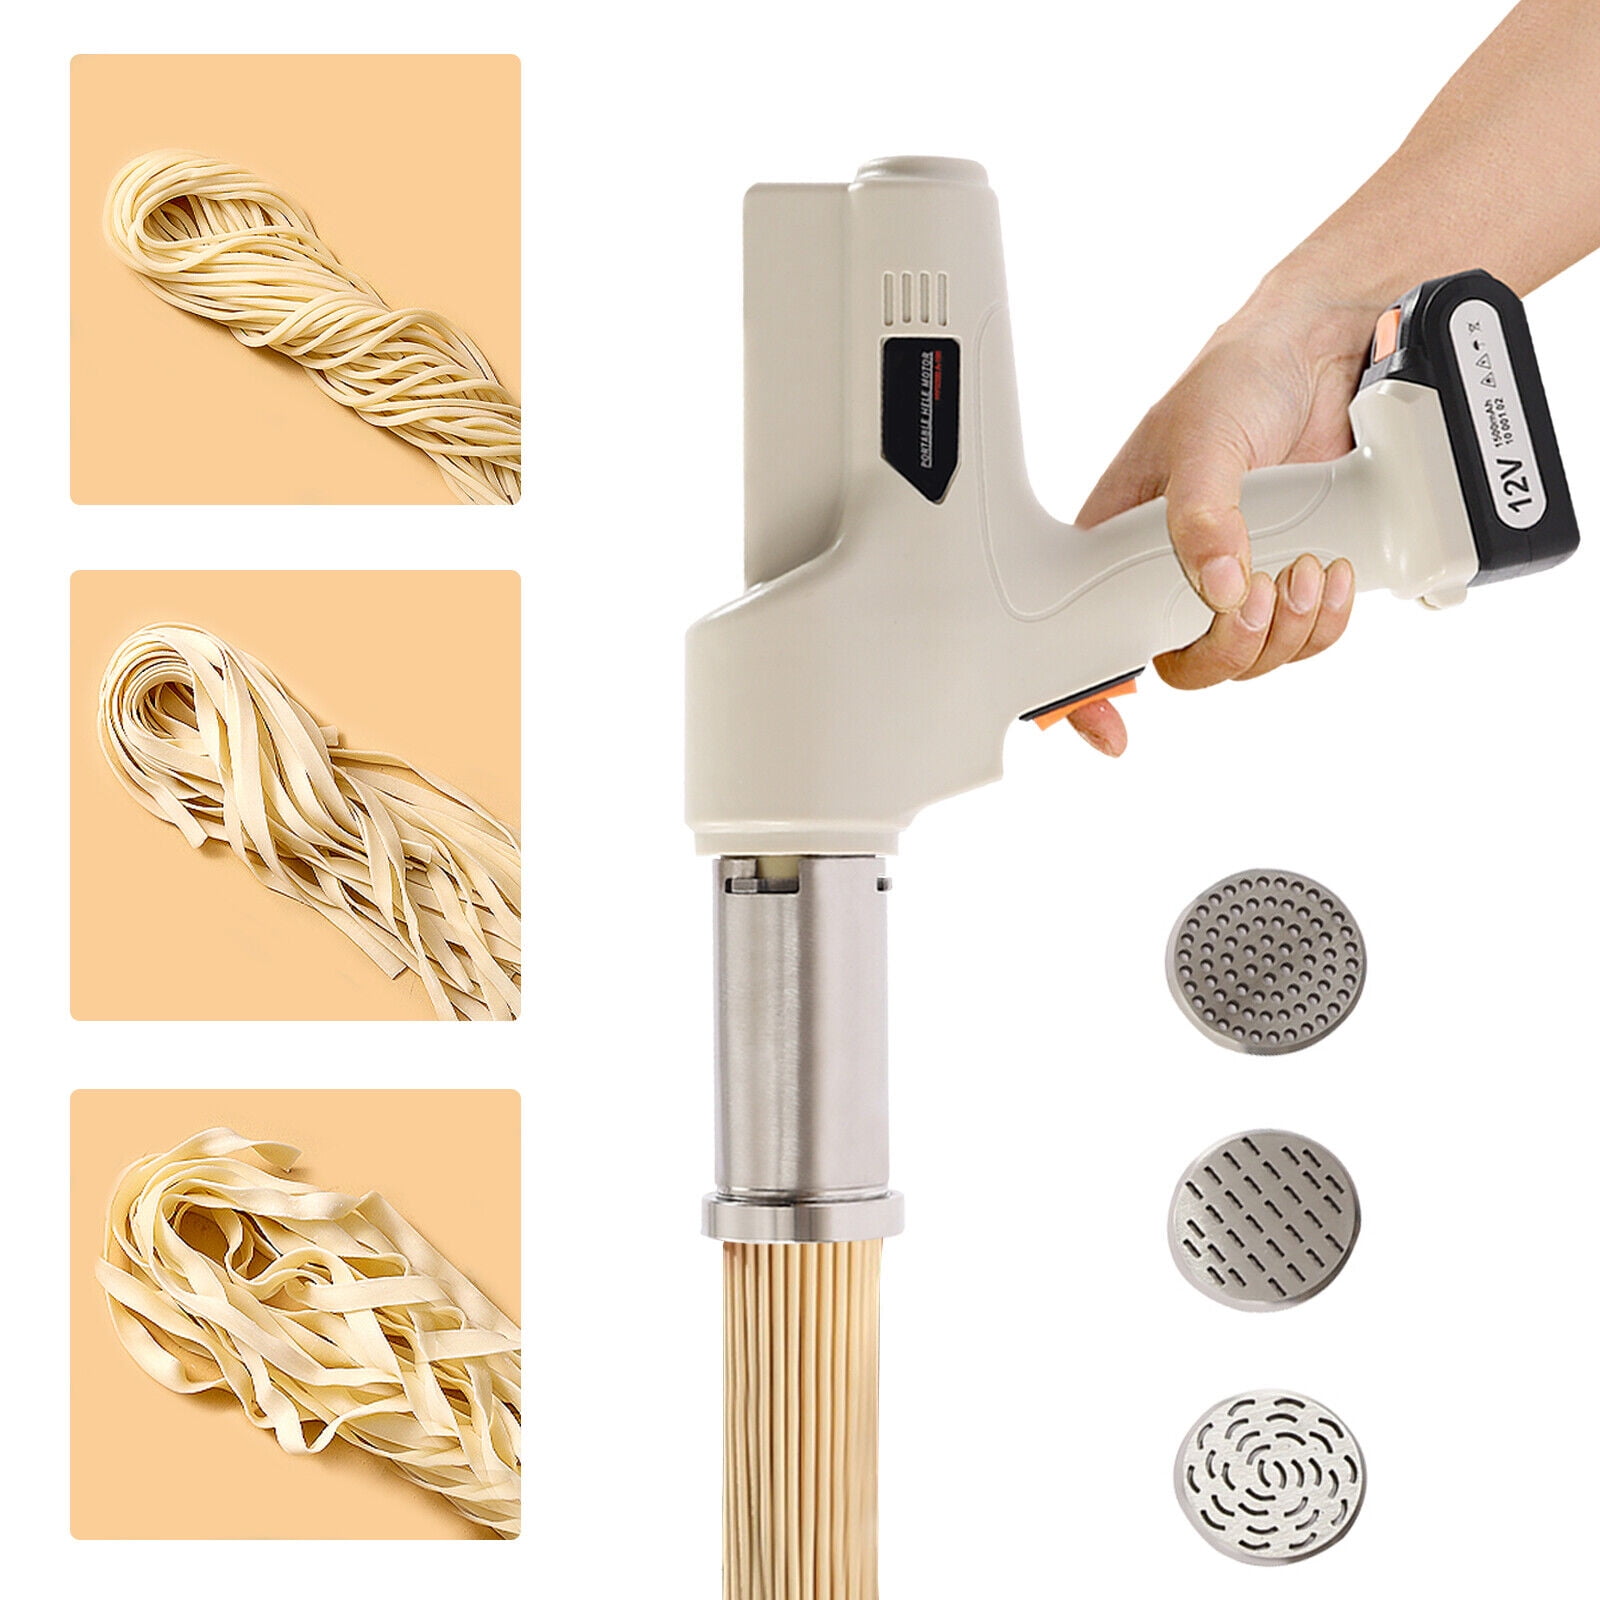 OUKANING 110V 78W Electric Handheld Pasta Maker 0.2inch/S Pushing